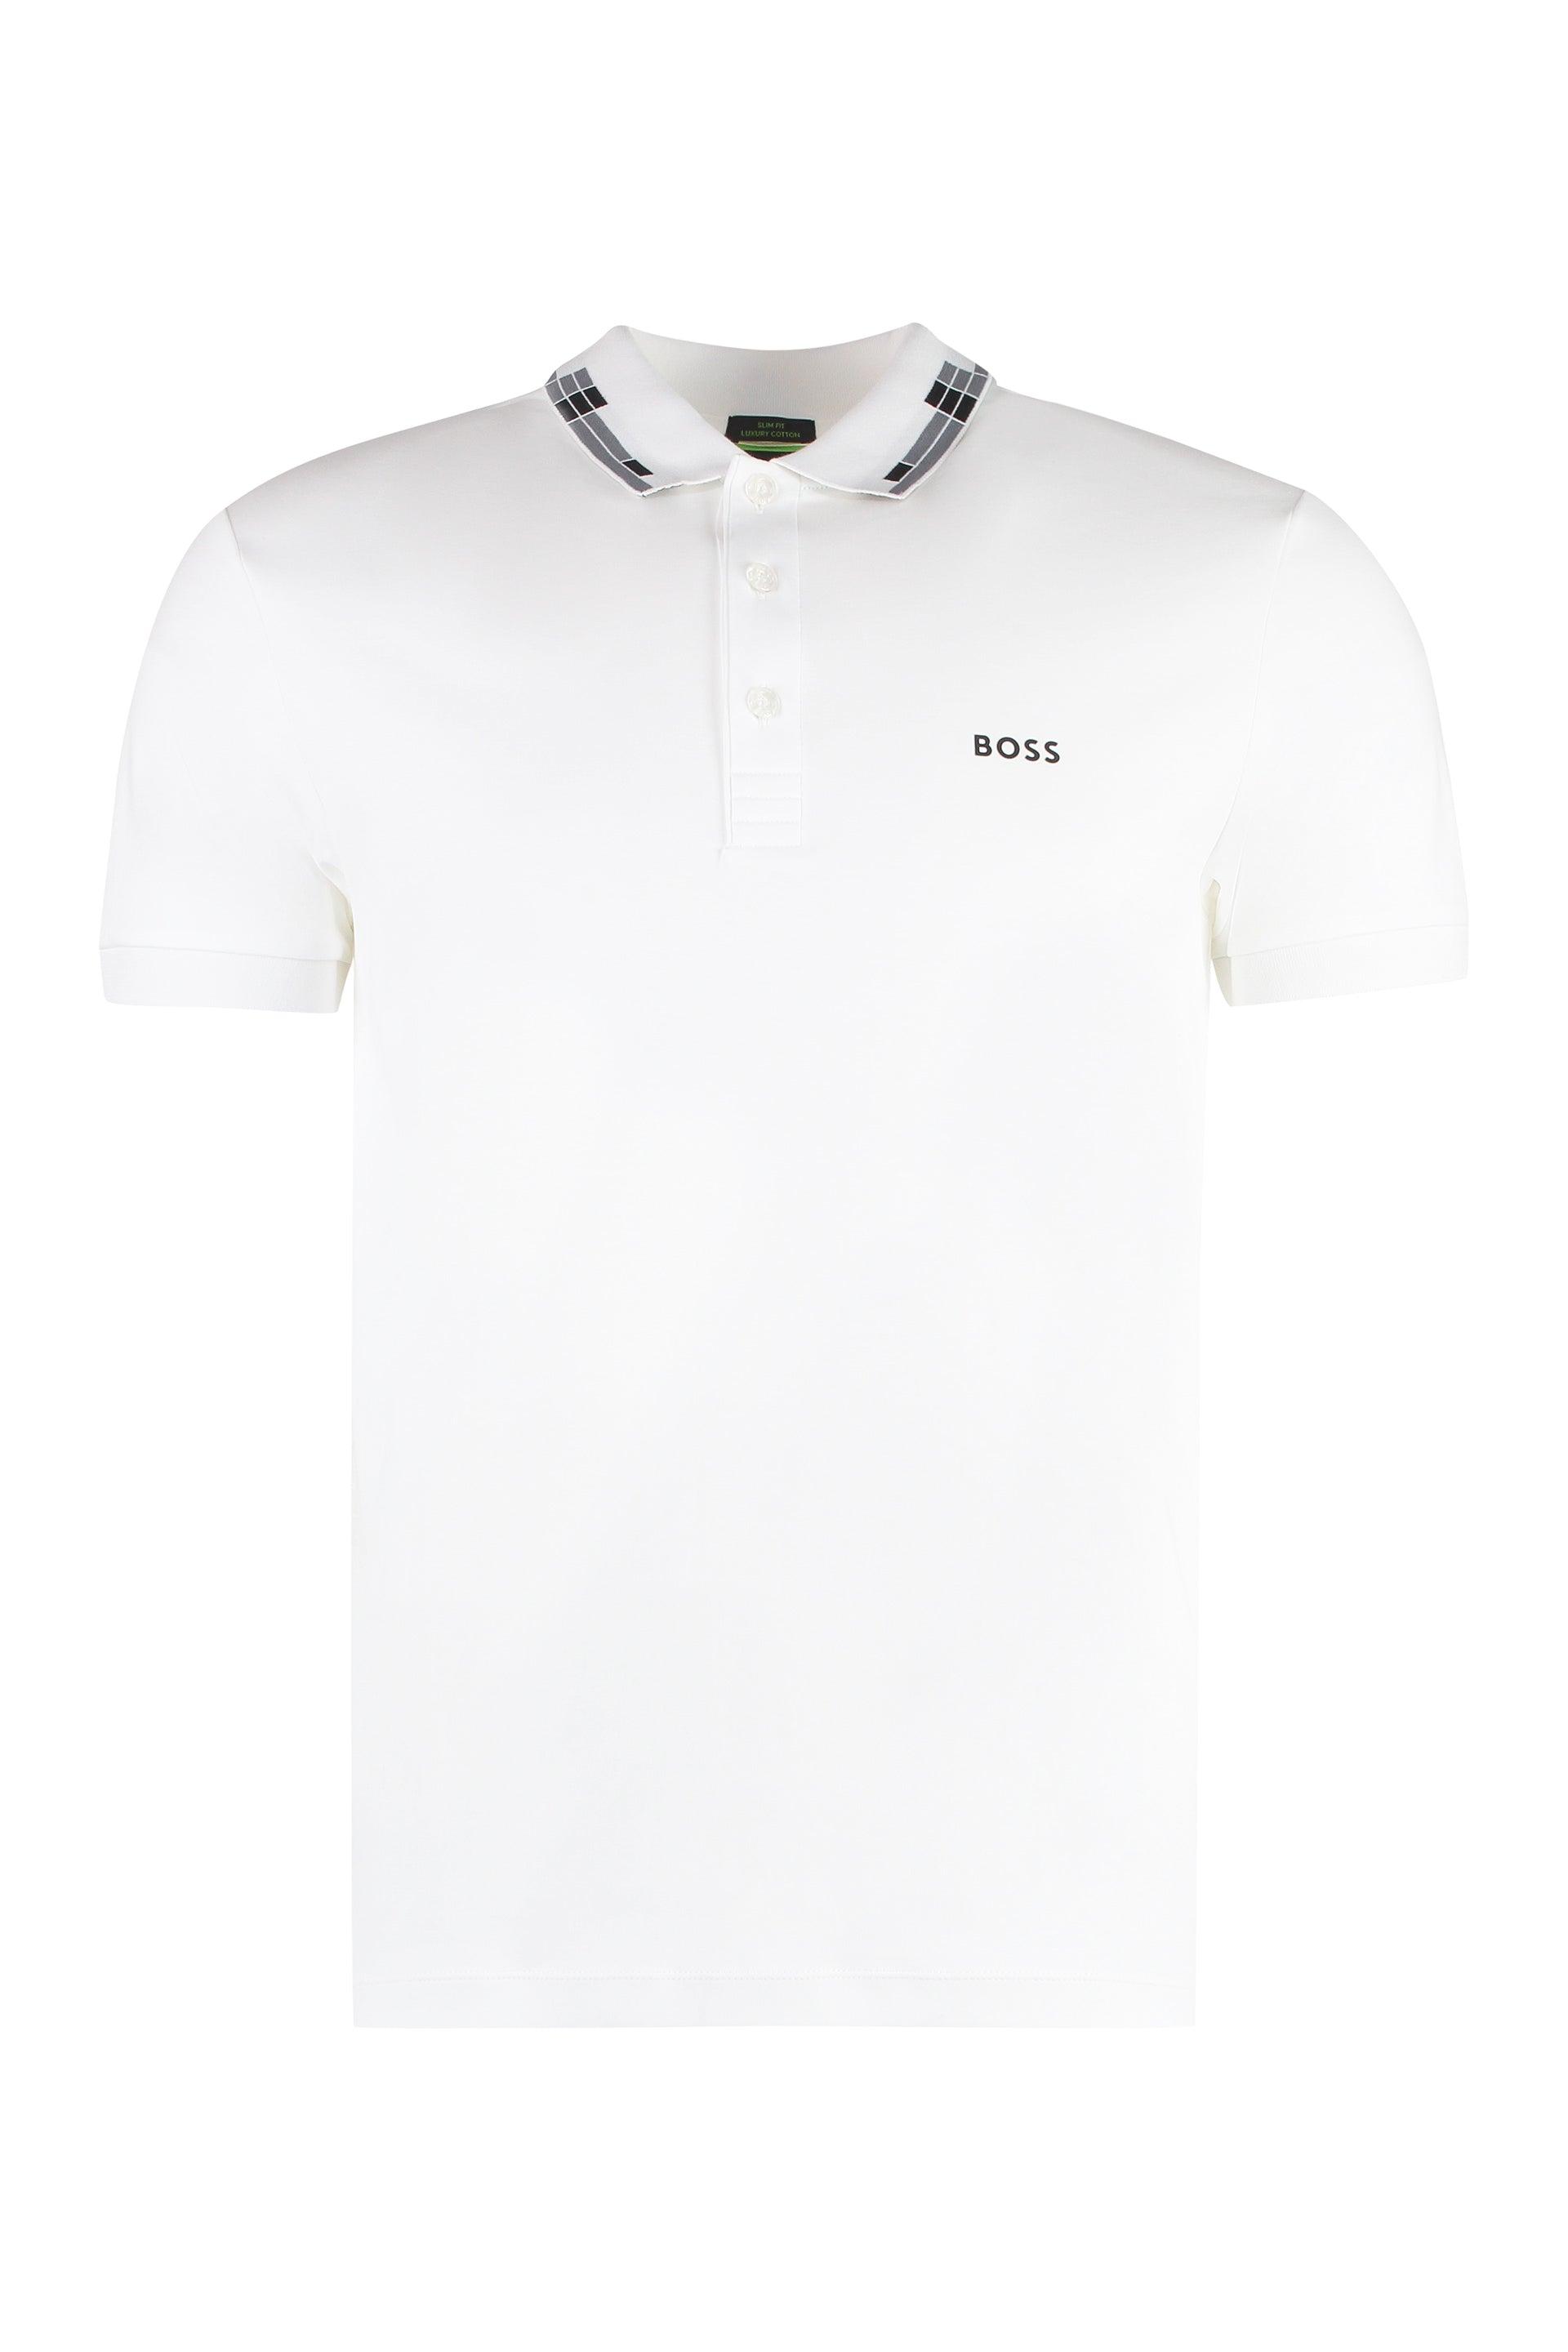 Compliment Mis Toegeven BOSS by HUGO BOSS Short Sleeve Cotton Polo Shirt in White for Men | Lyst